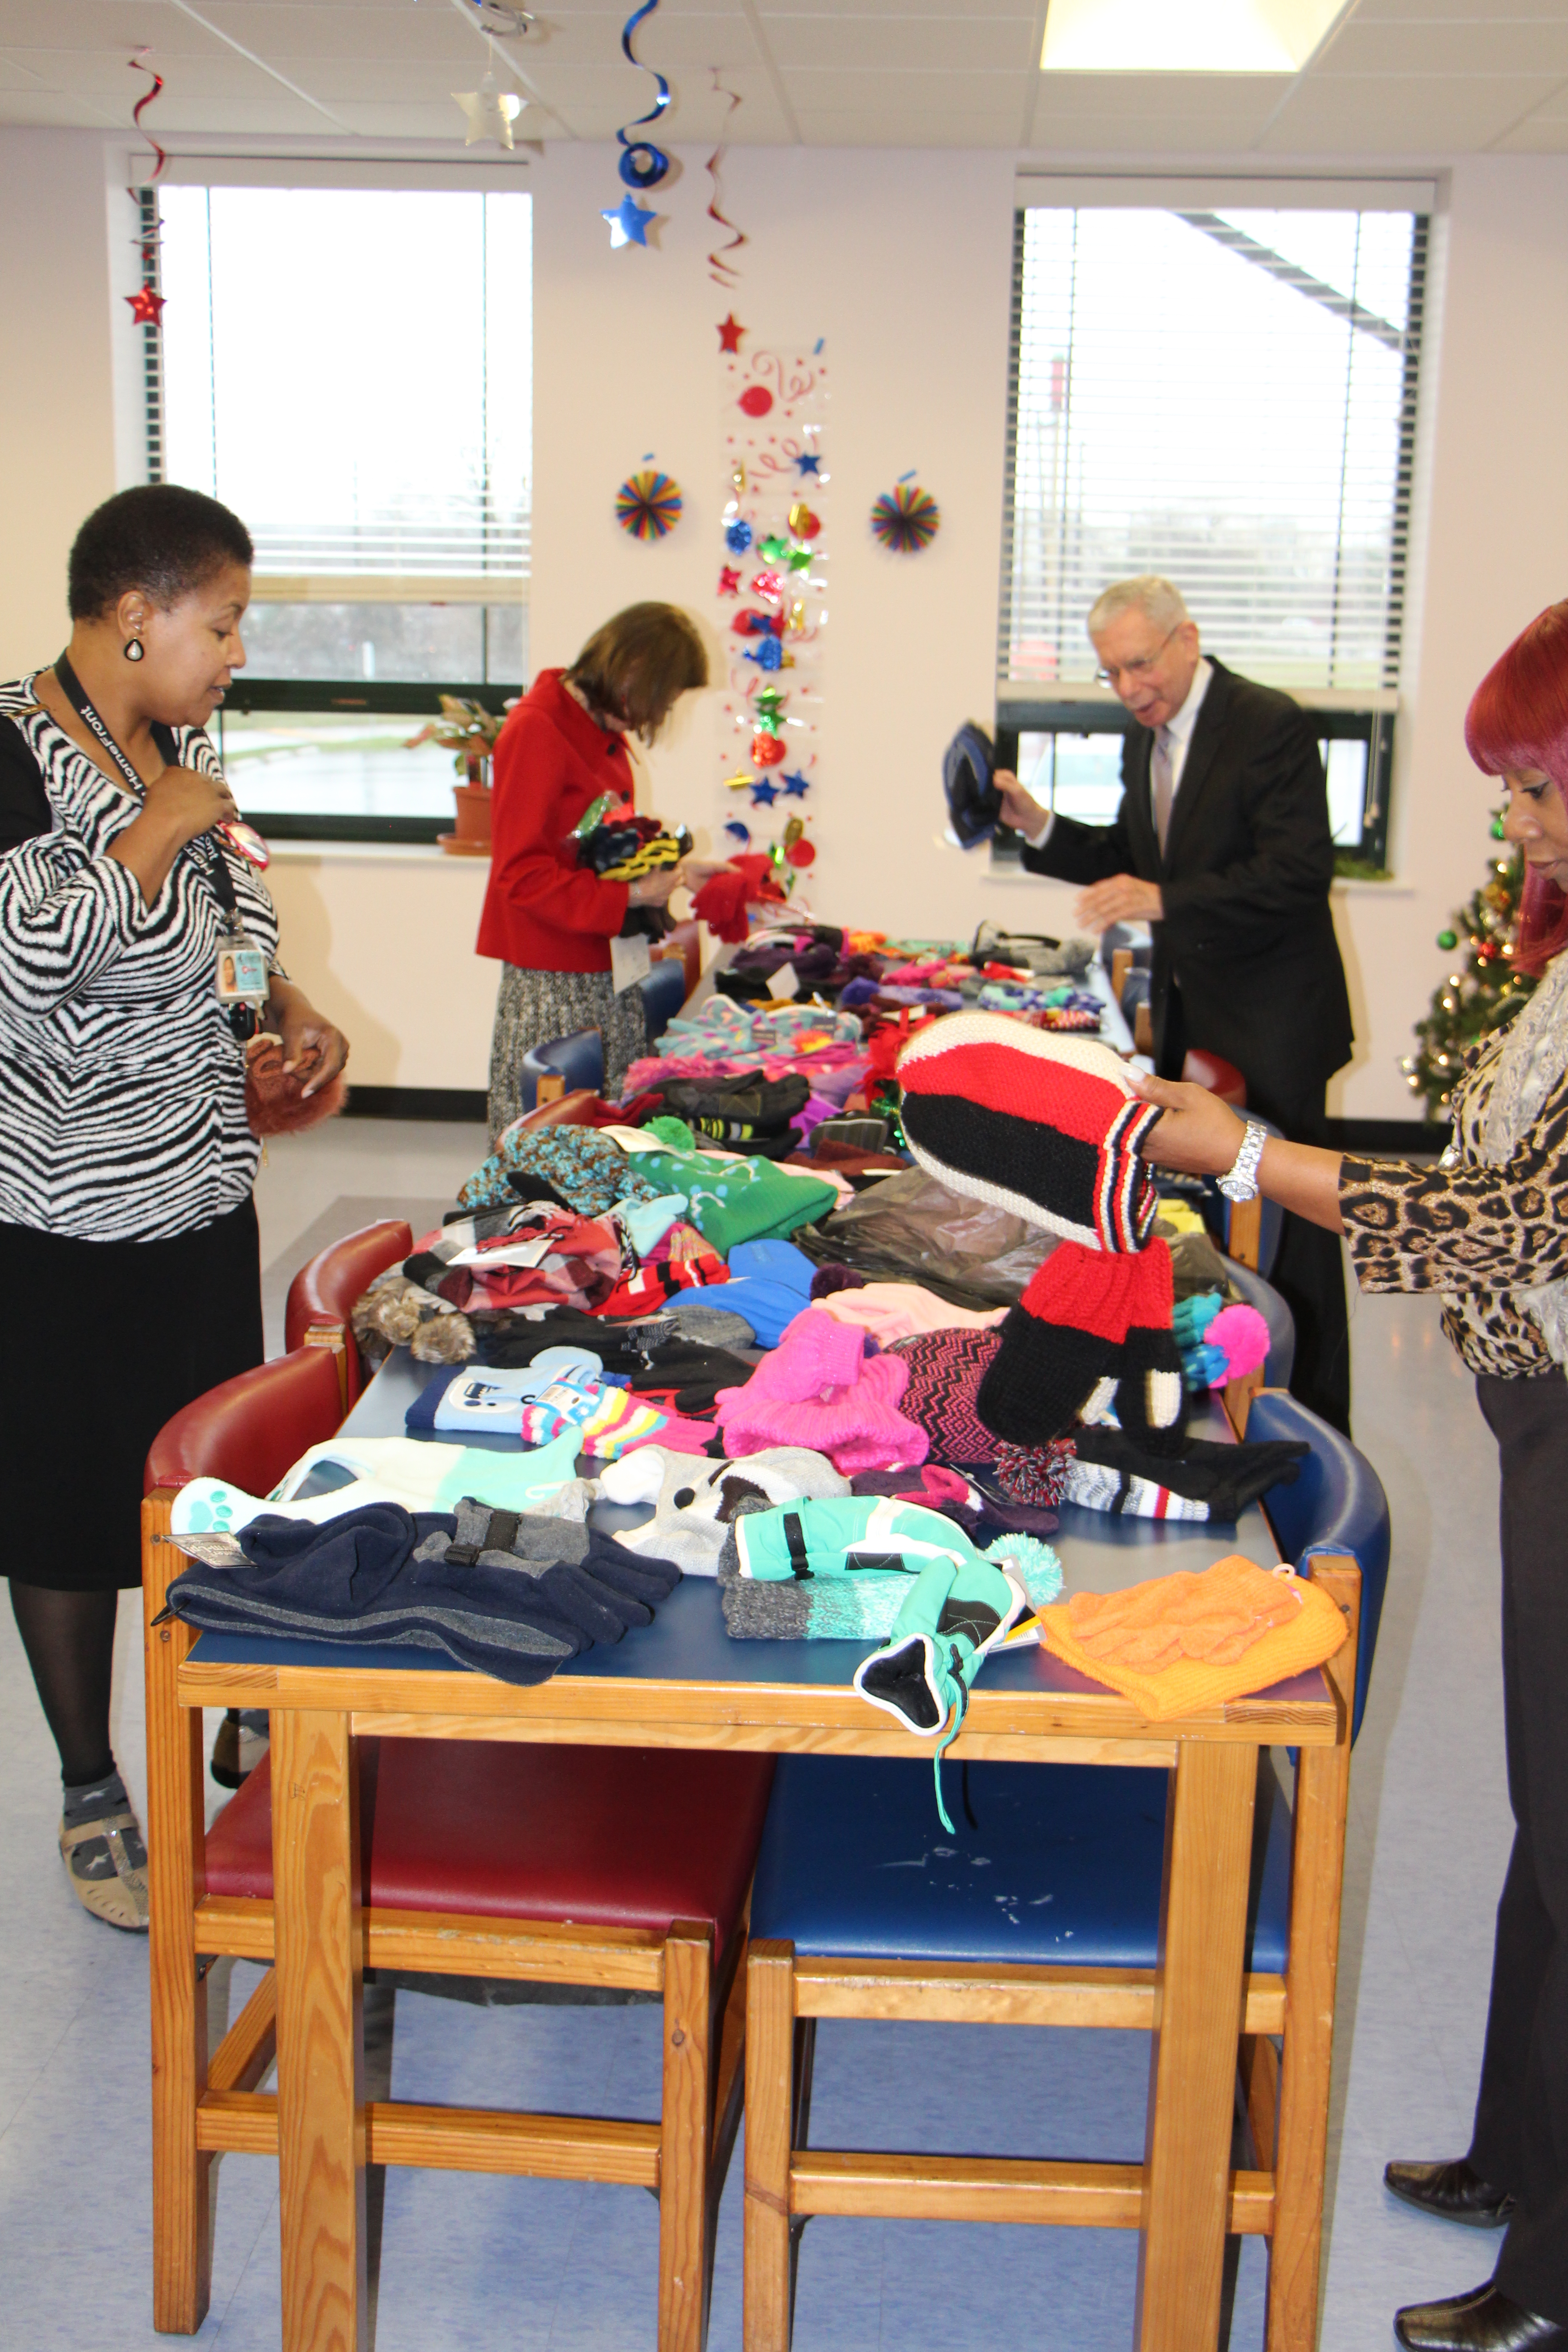 People checking on donated clothing laying on the tables.